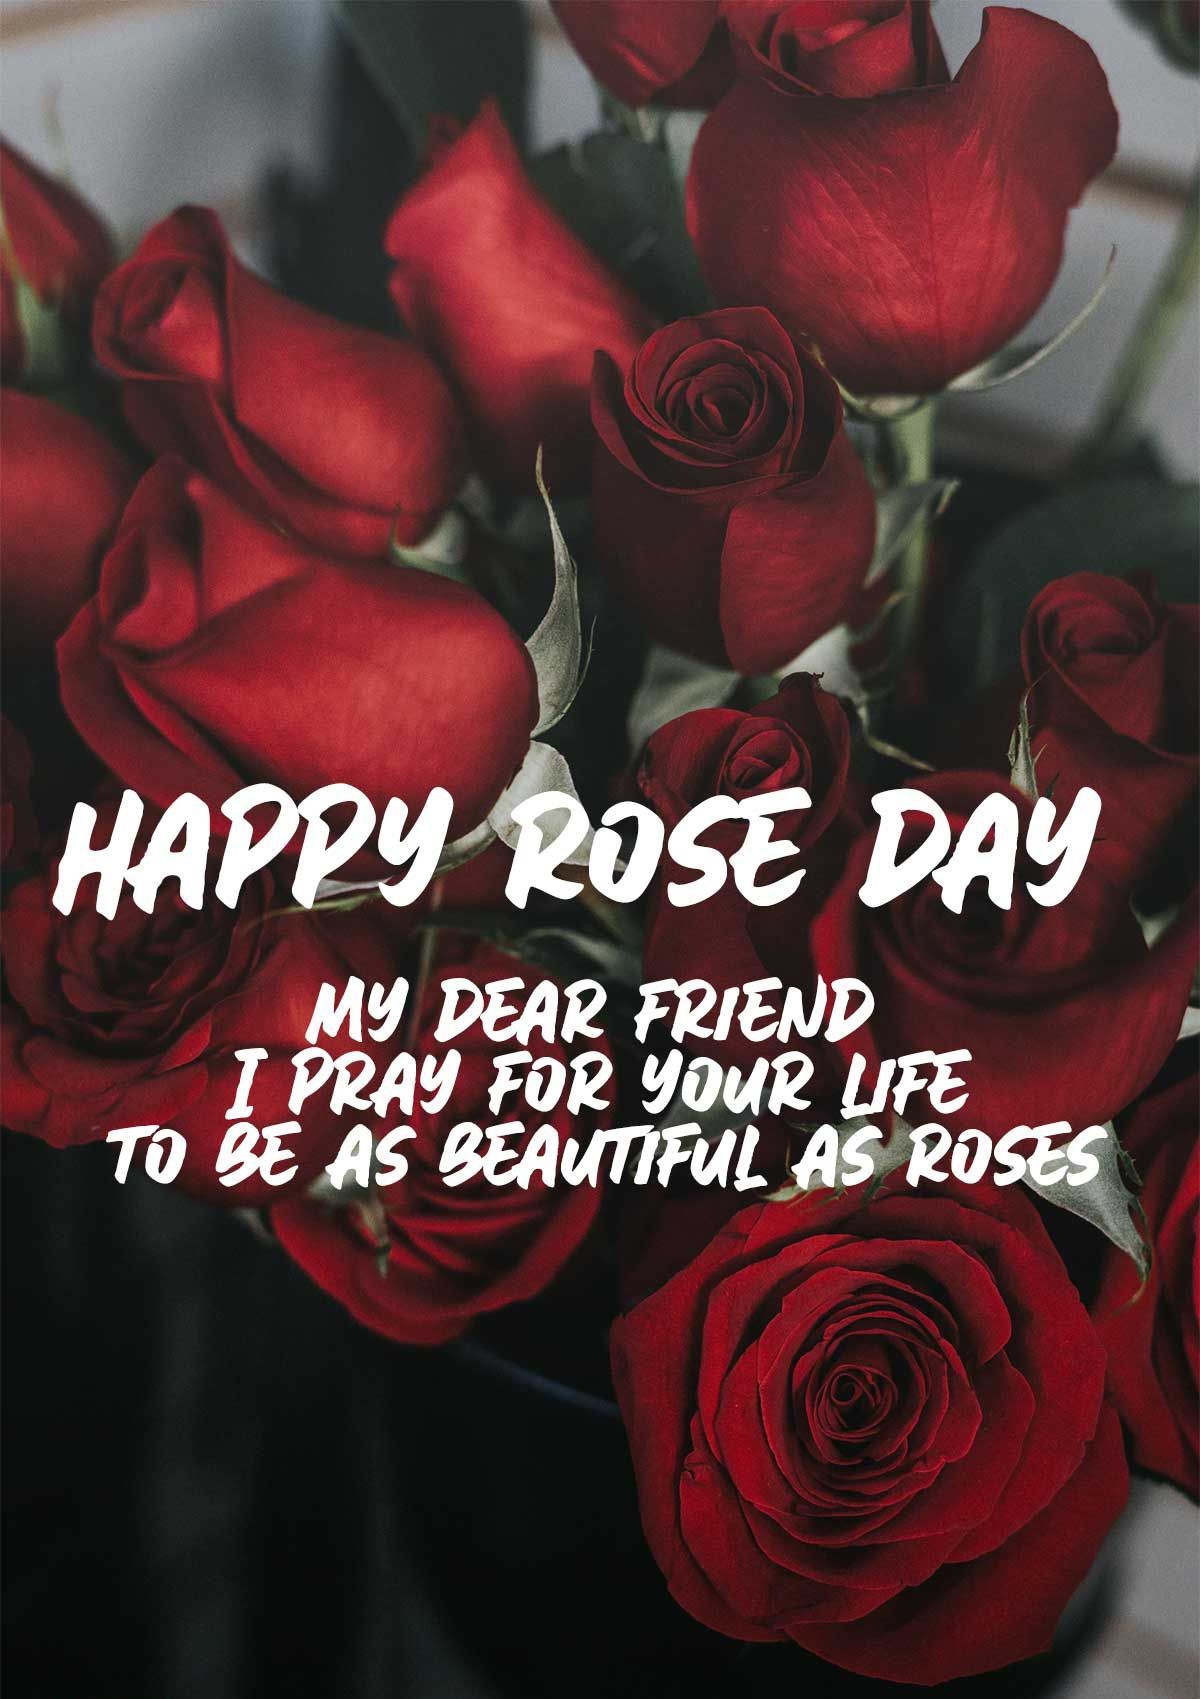 happy rose day 2022 download